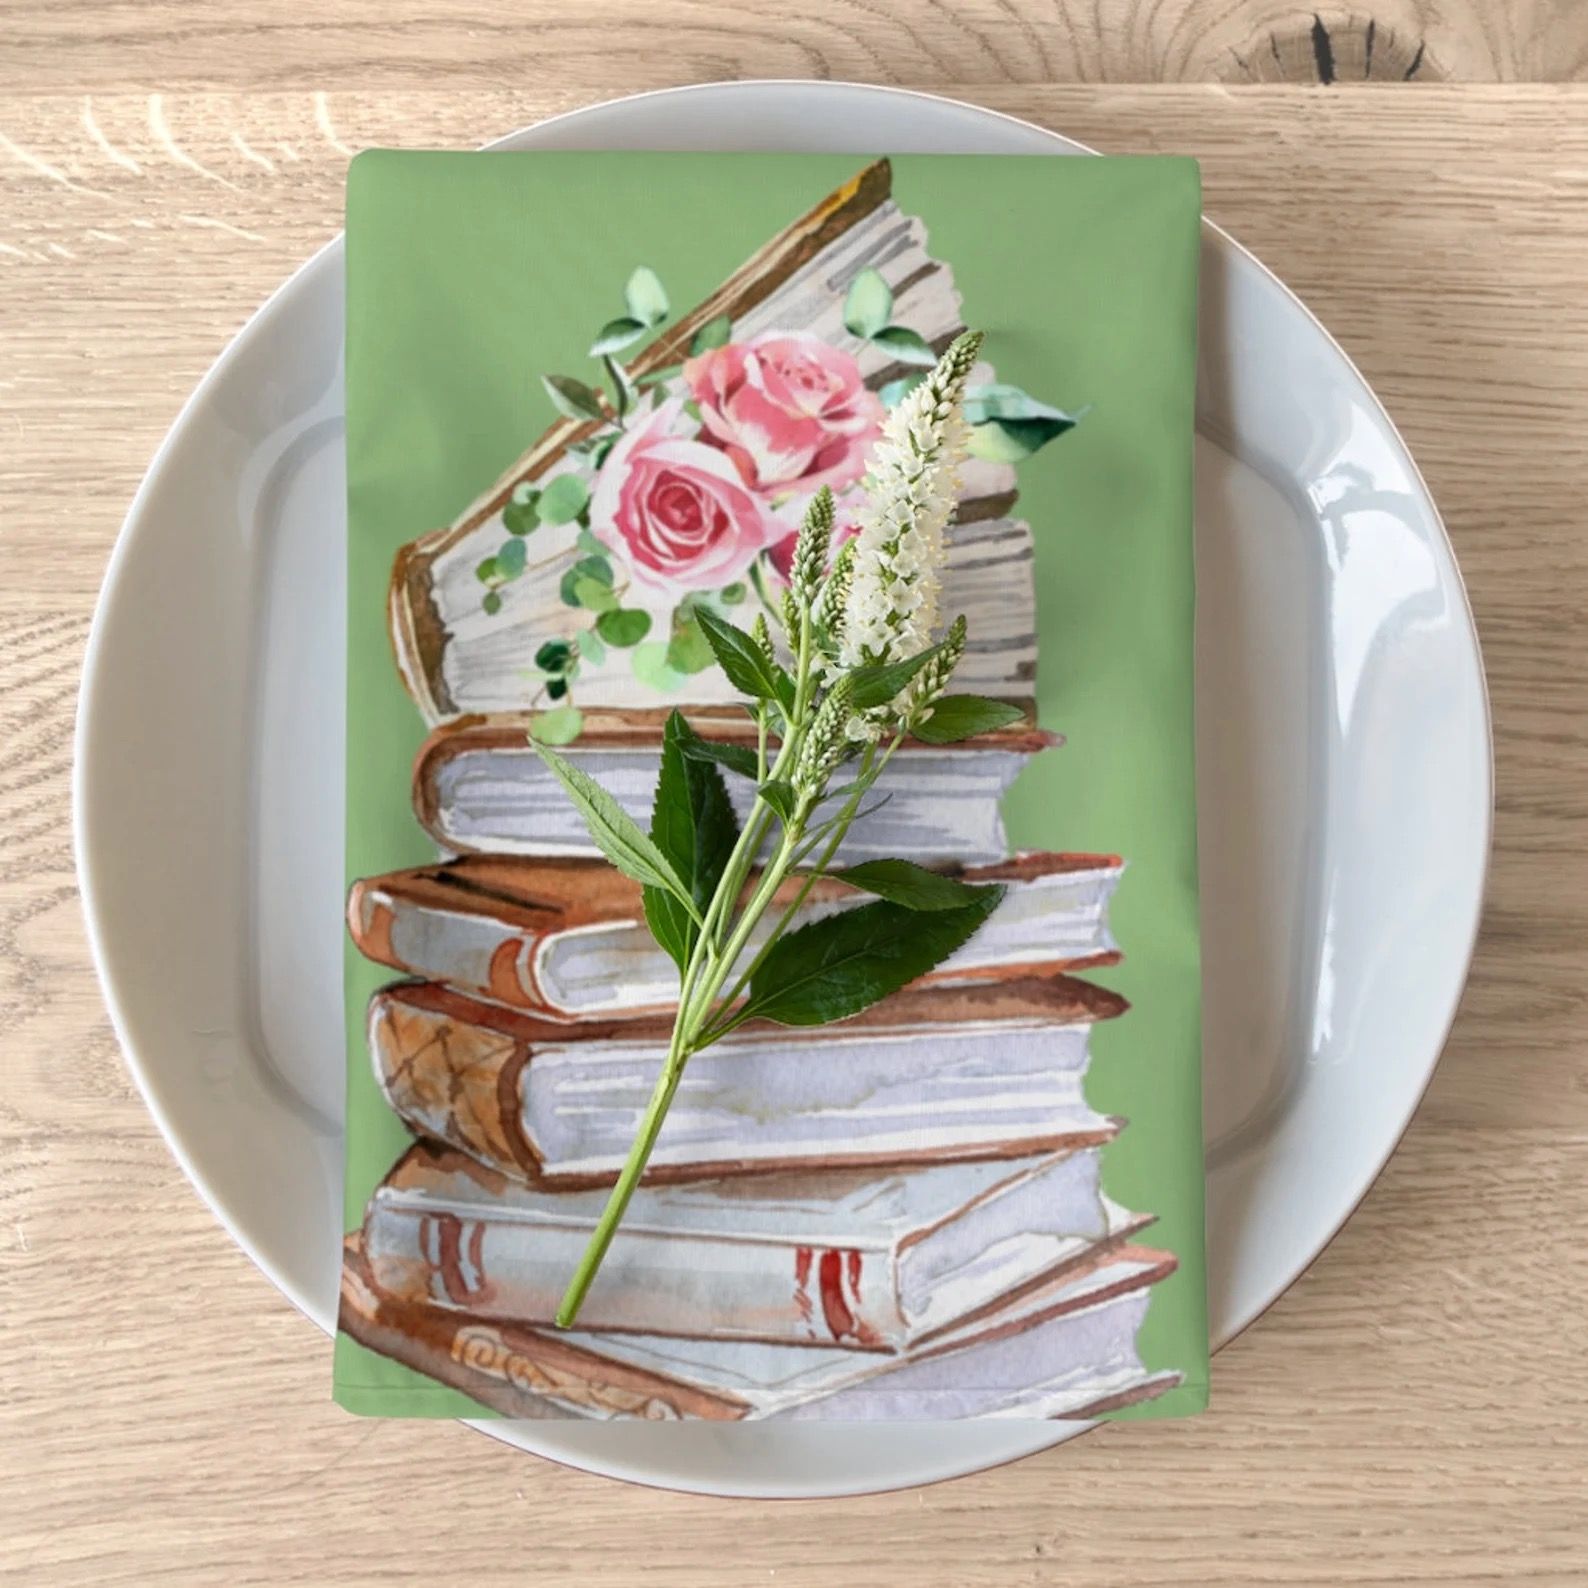 A green cloth napkin is folded on top of a white ceramic plate. The napkin has an image of a stack of old-fashioned leather-bound books, topped with a red rose blossom.